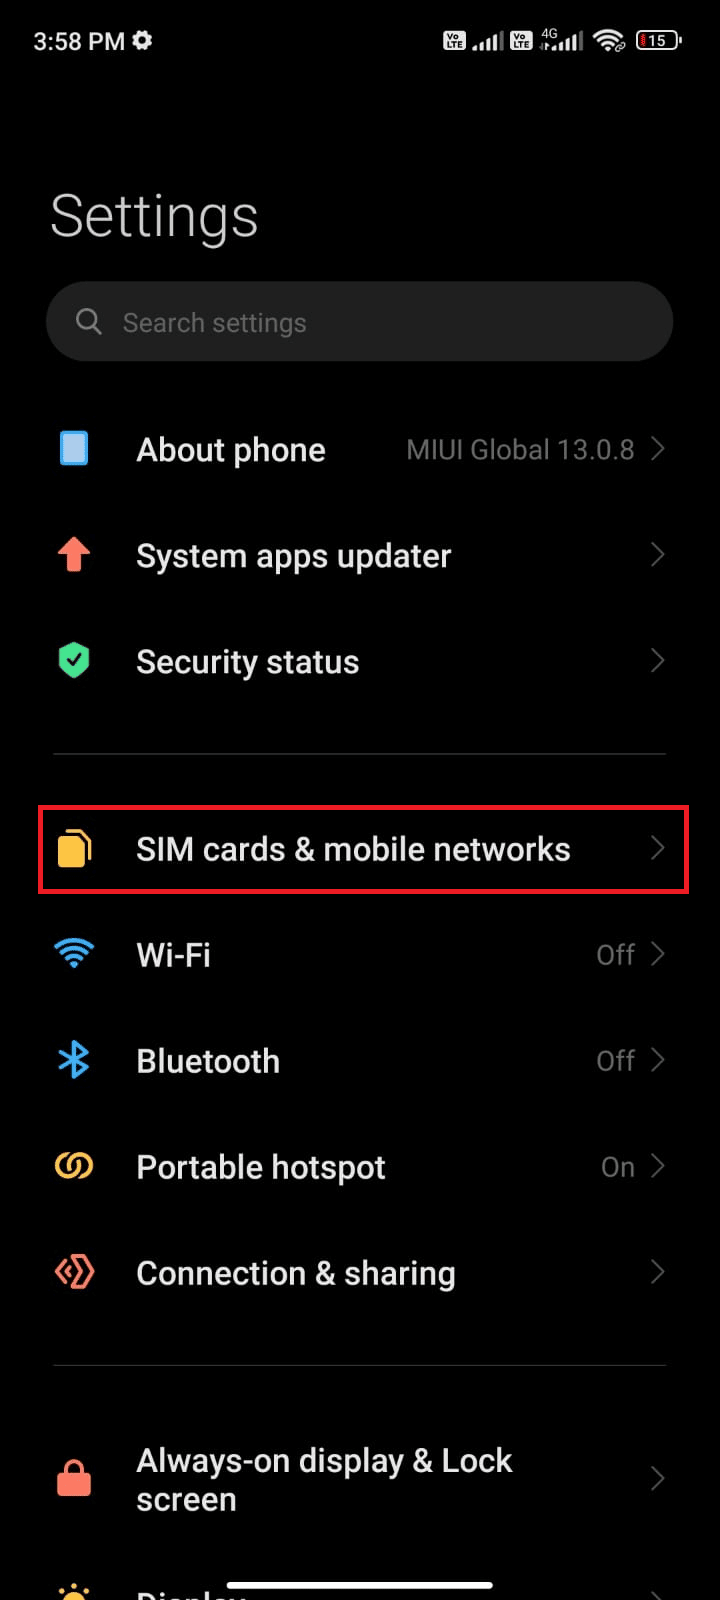 tap the SIM cards mobile networks option. Fix Facebook Session Expired Error